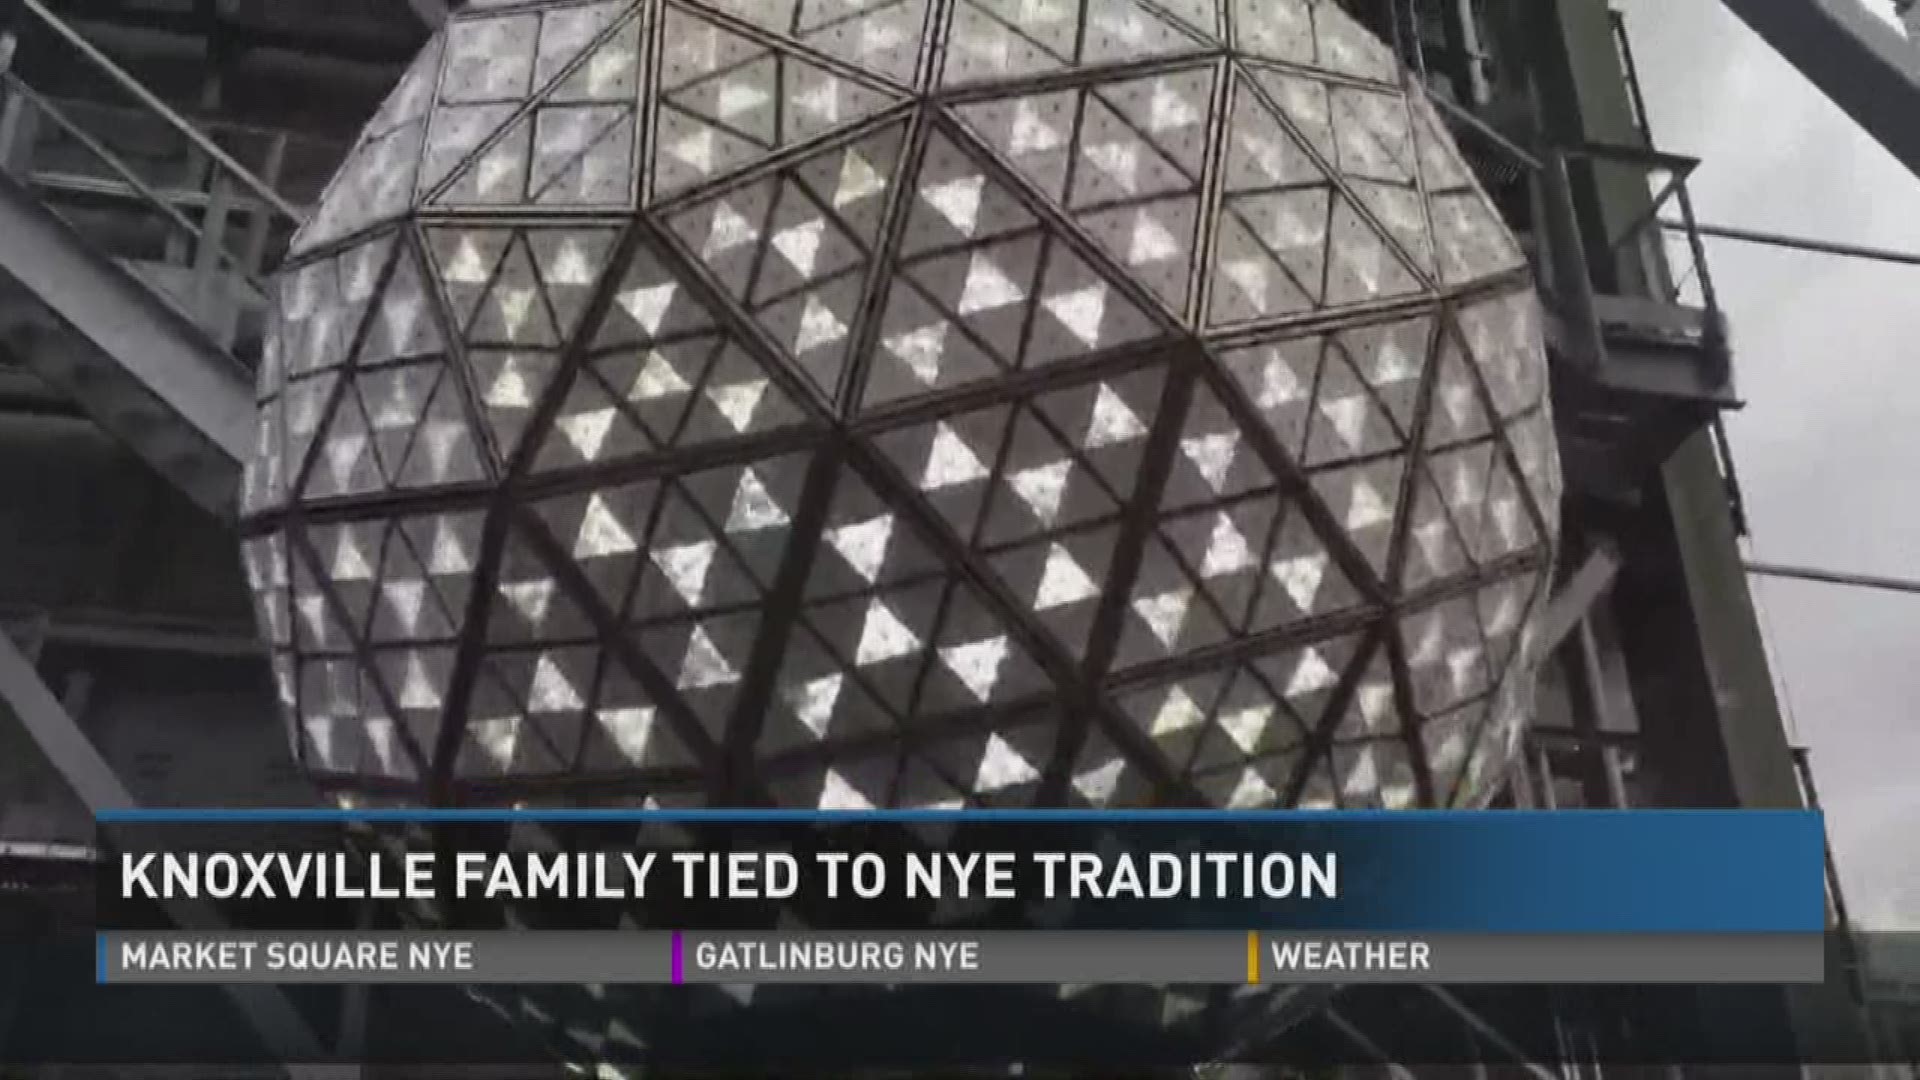 A Knoxville family remembers their ancestor William Palmer, who was the engineer behind the Times Square New Year's Eve ball drop.